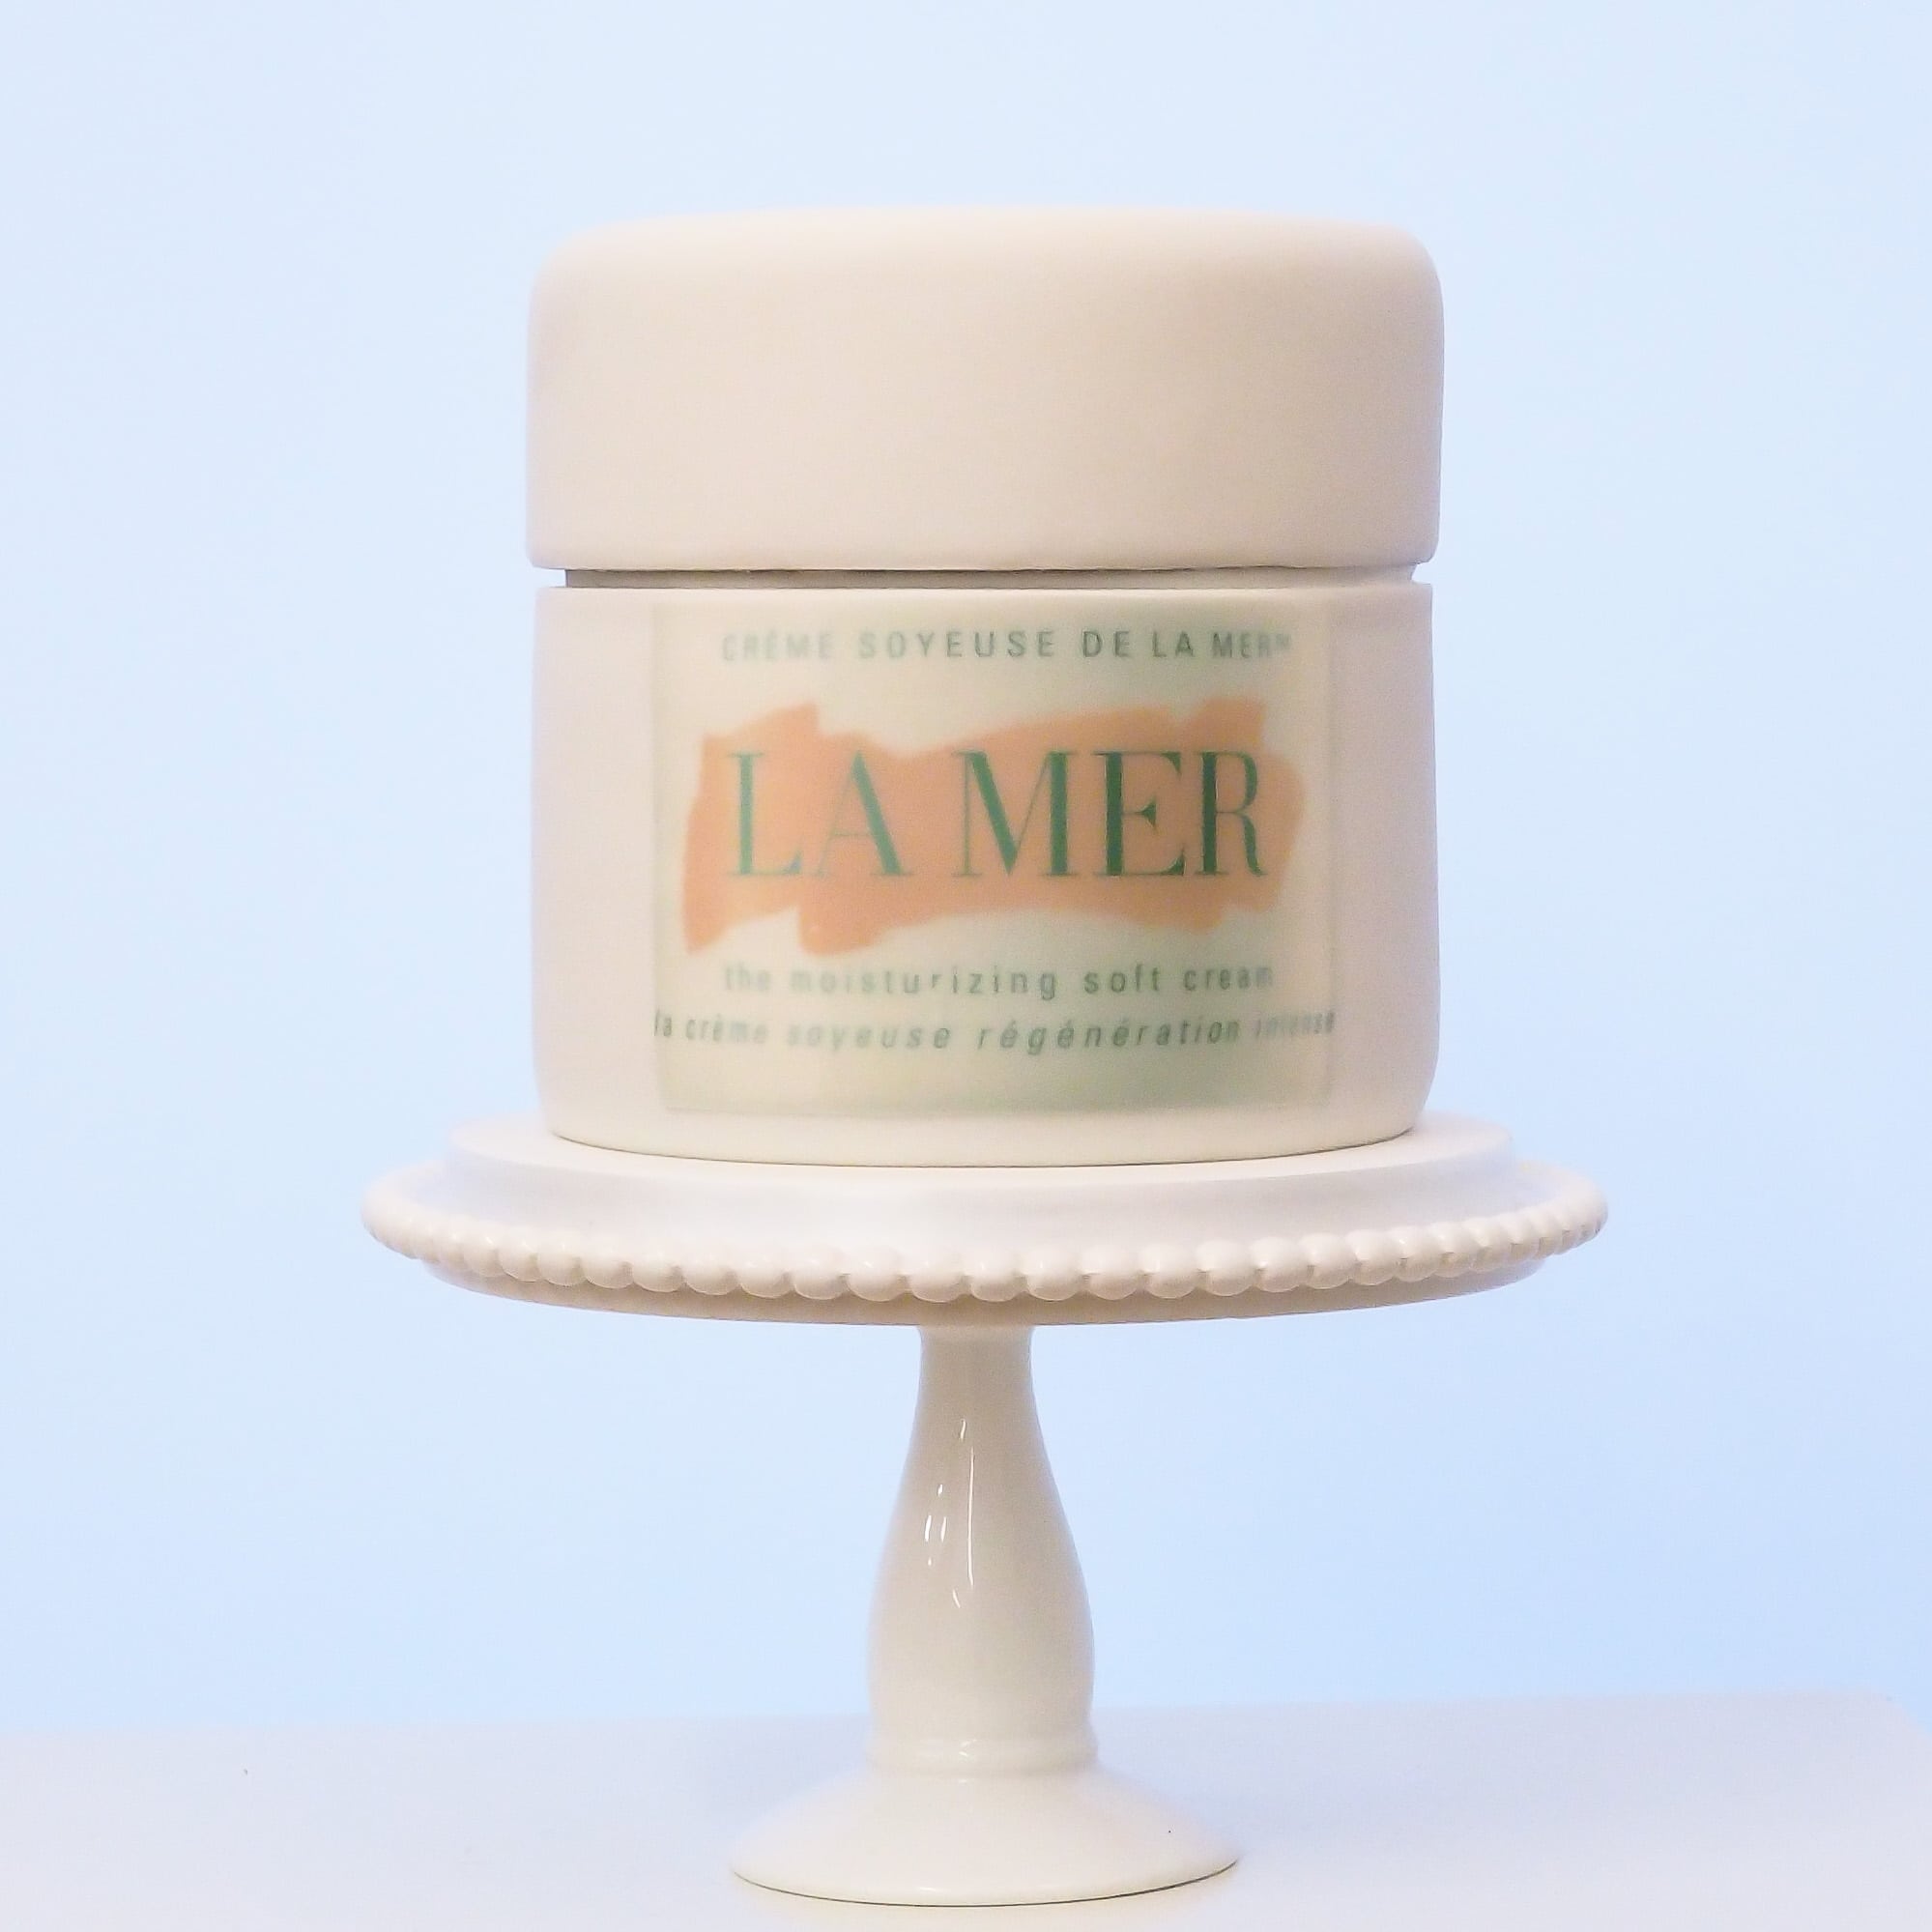 Creme de la Mer corporate cake for corporate events, product launches, parties